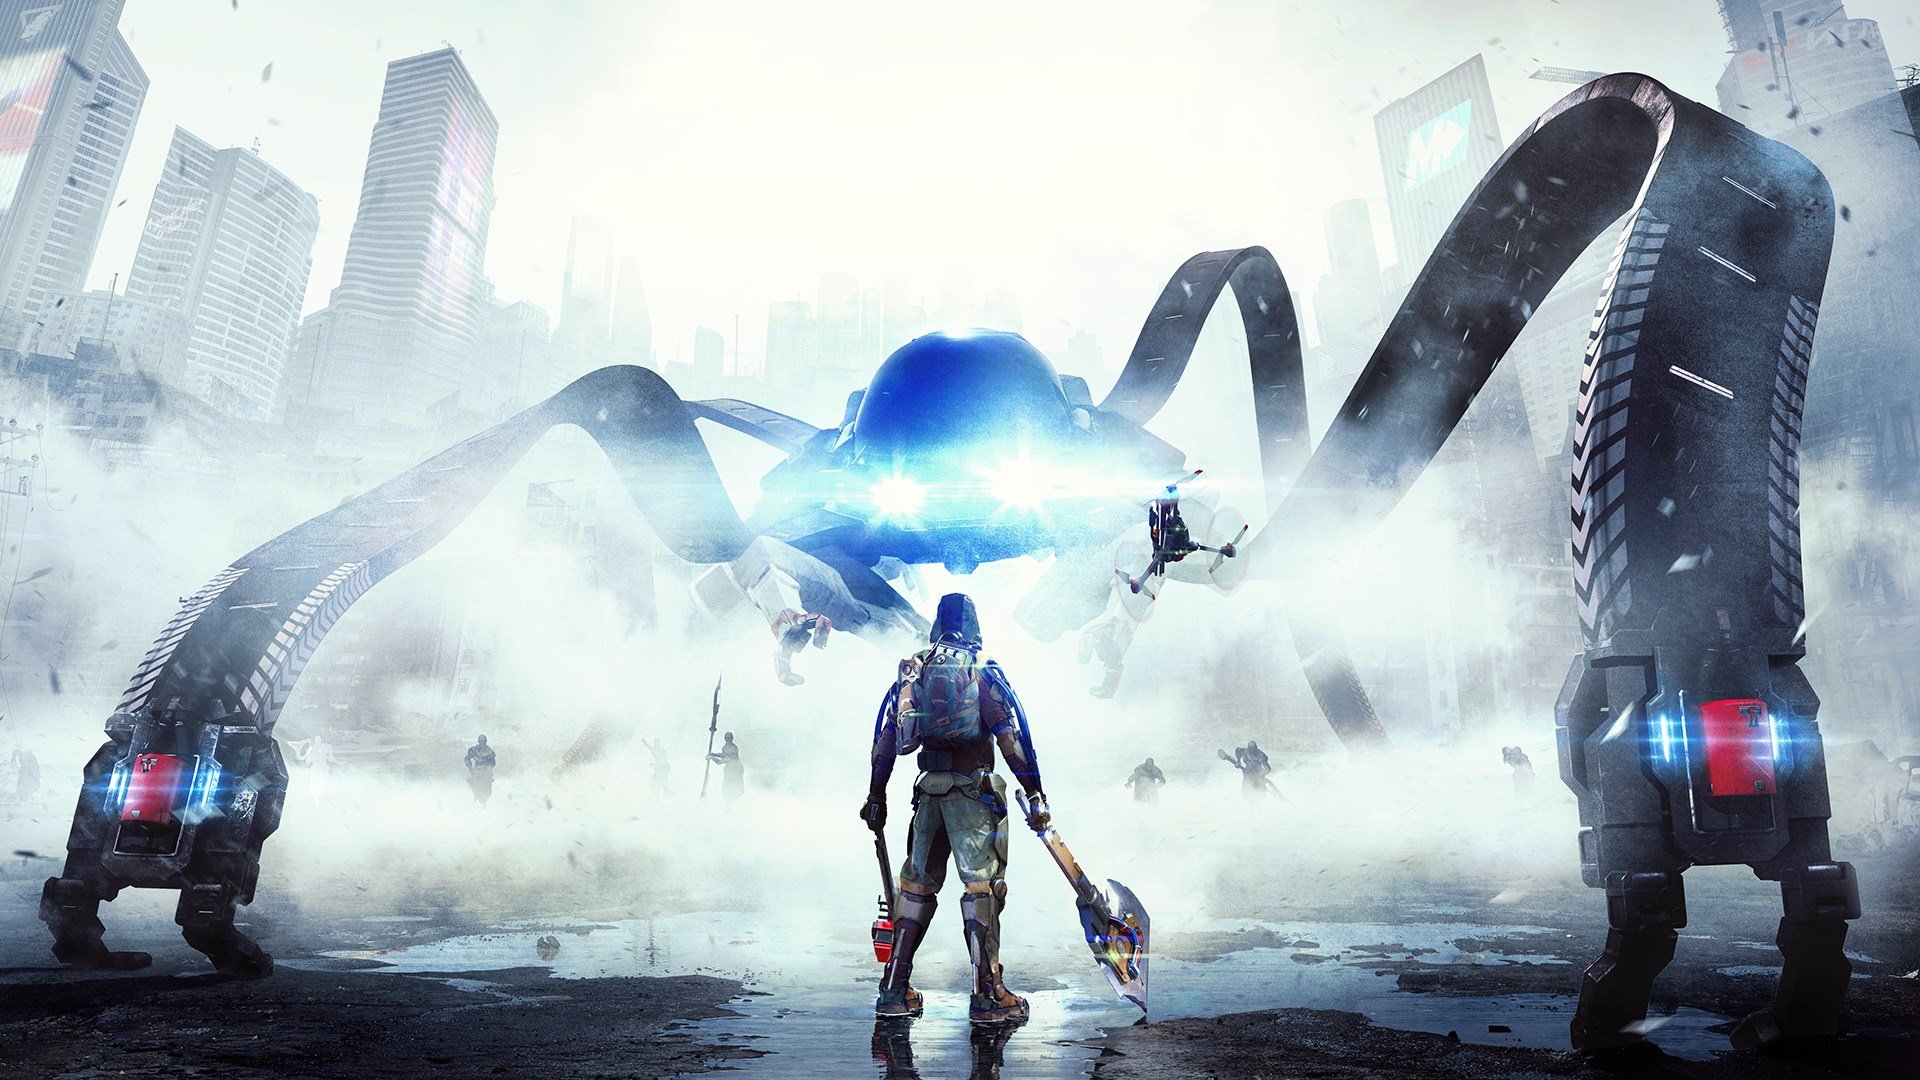 The Surge 2 - Windows 10 cover image